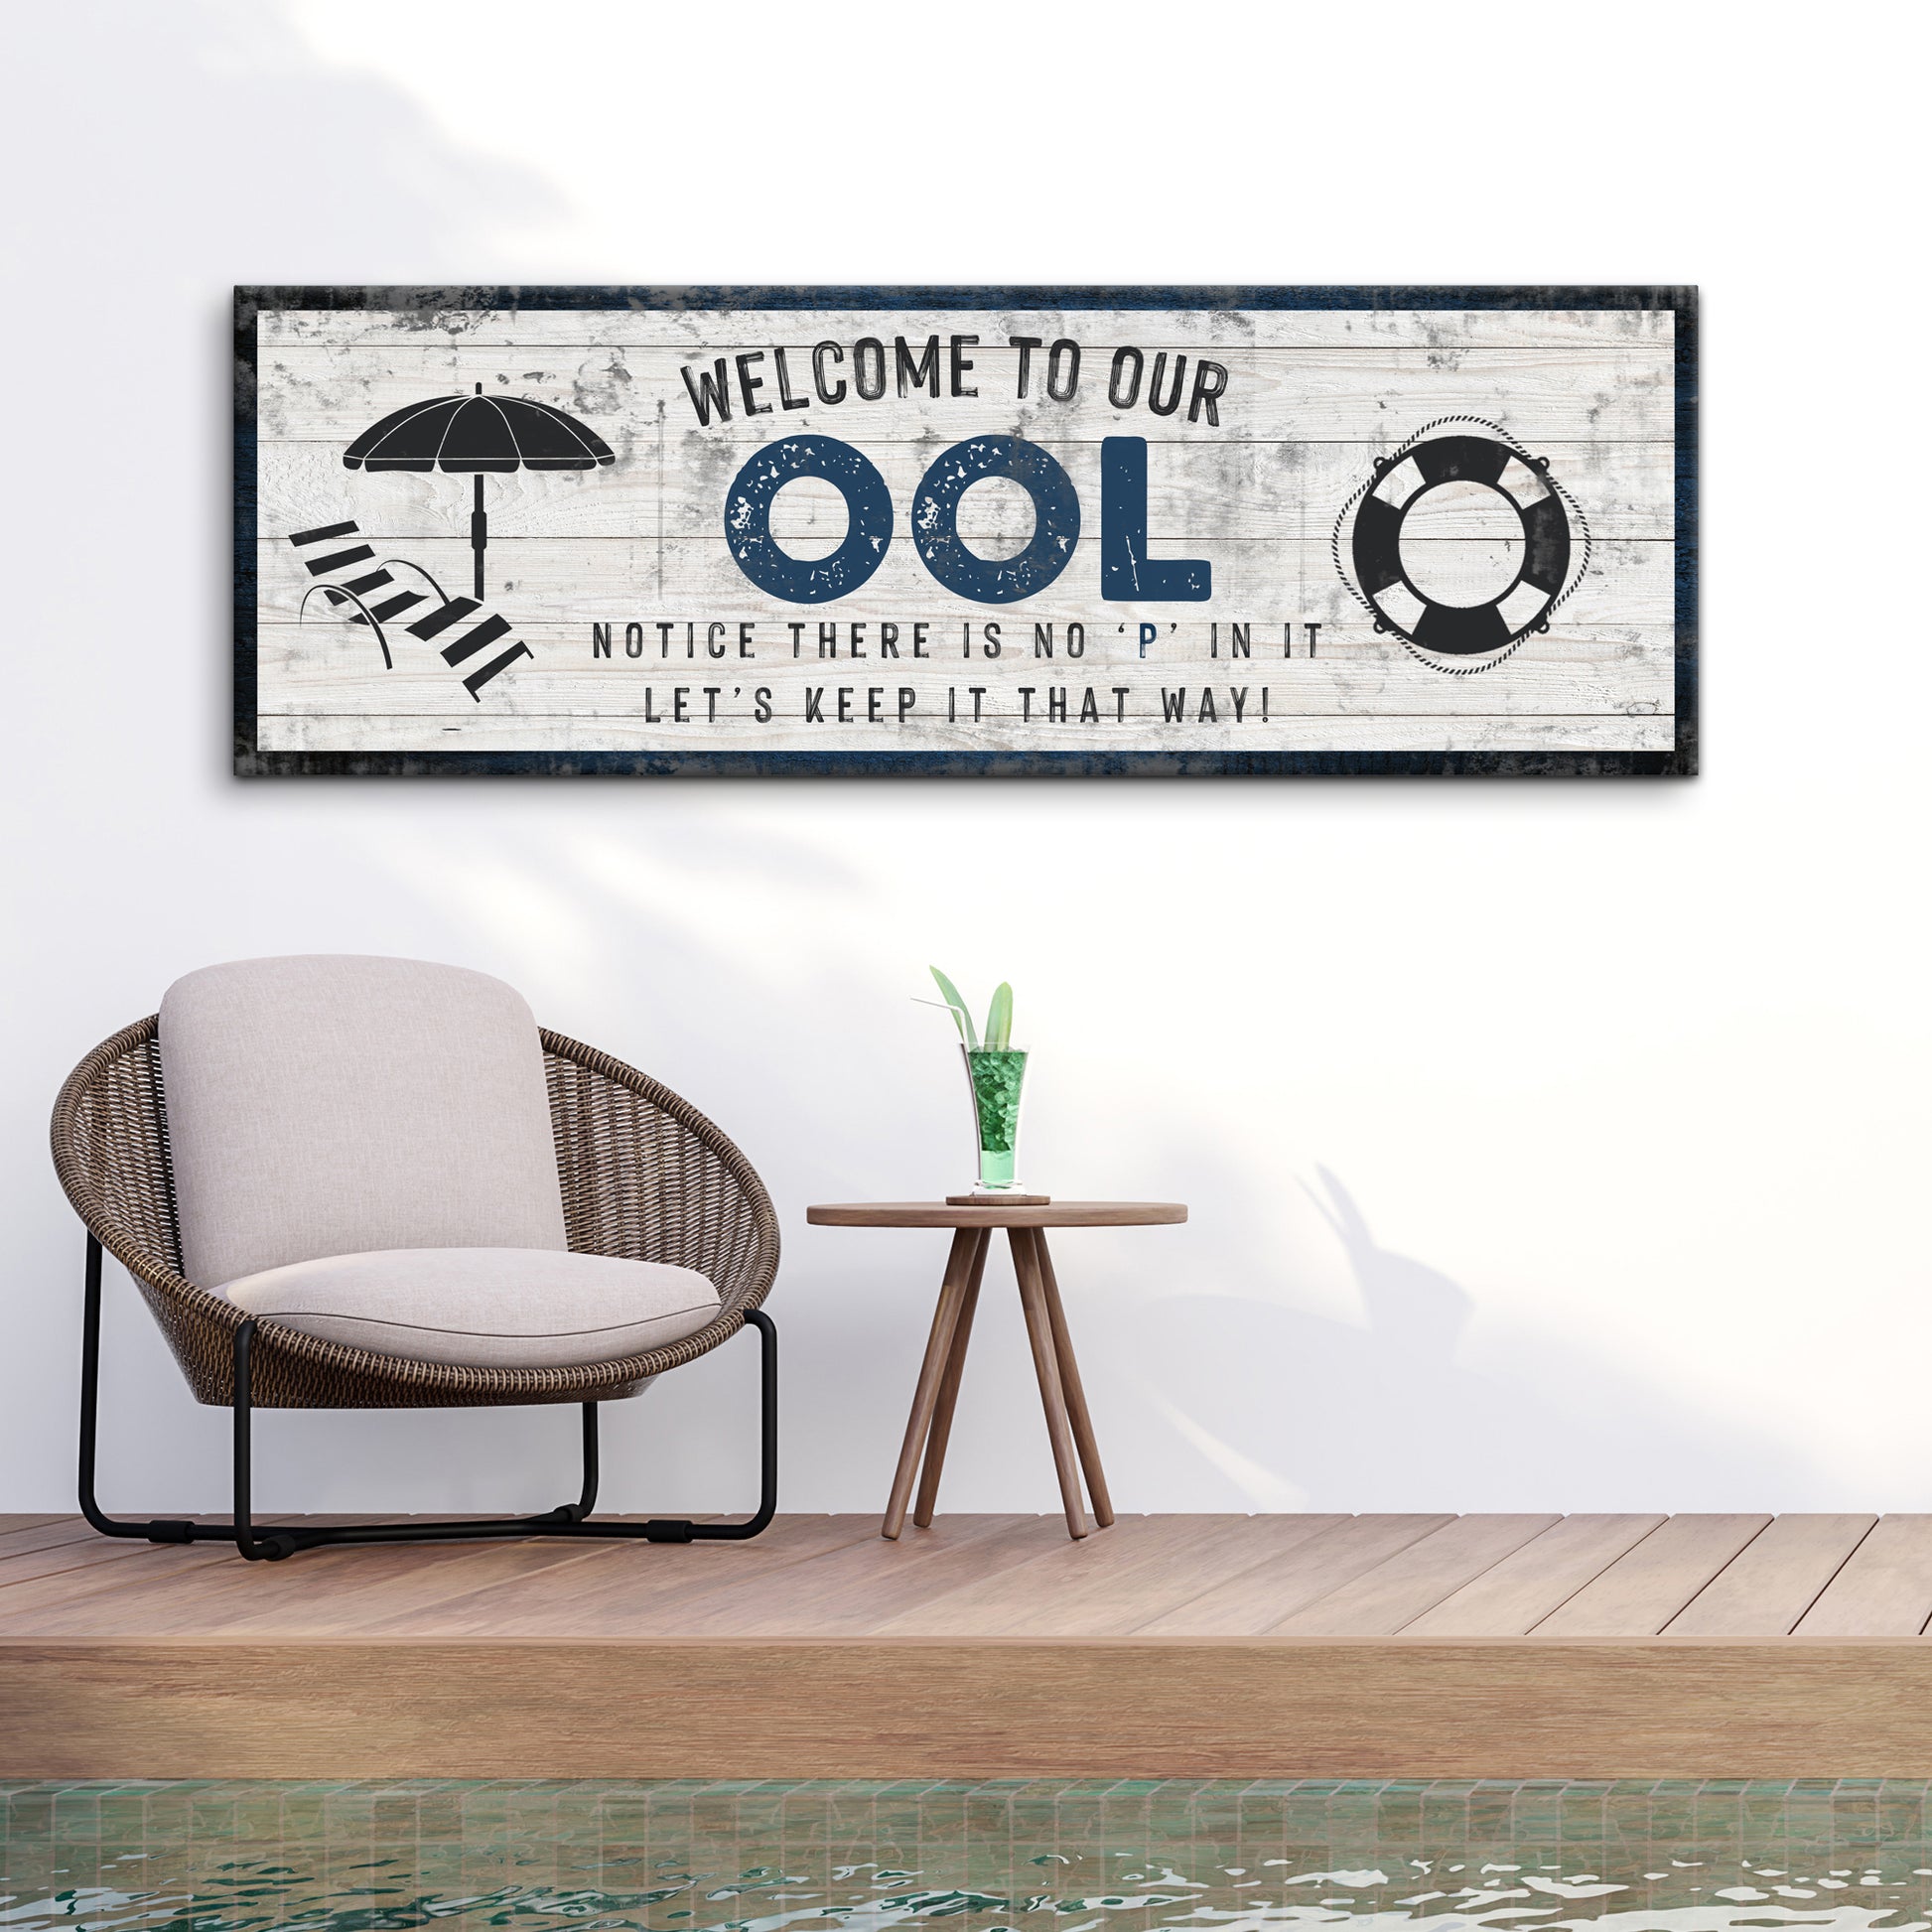 Welcome To Our Pool Sign Style 2 - Image by Tailored Canvases